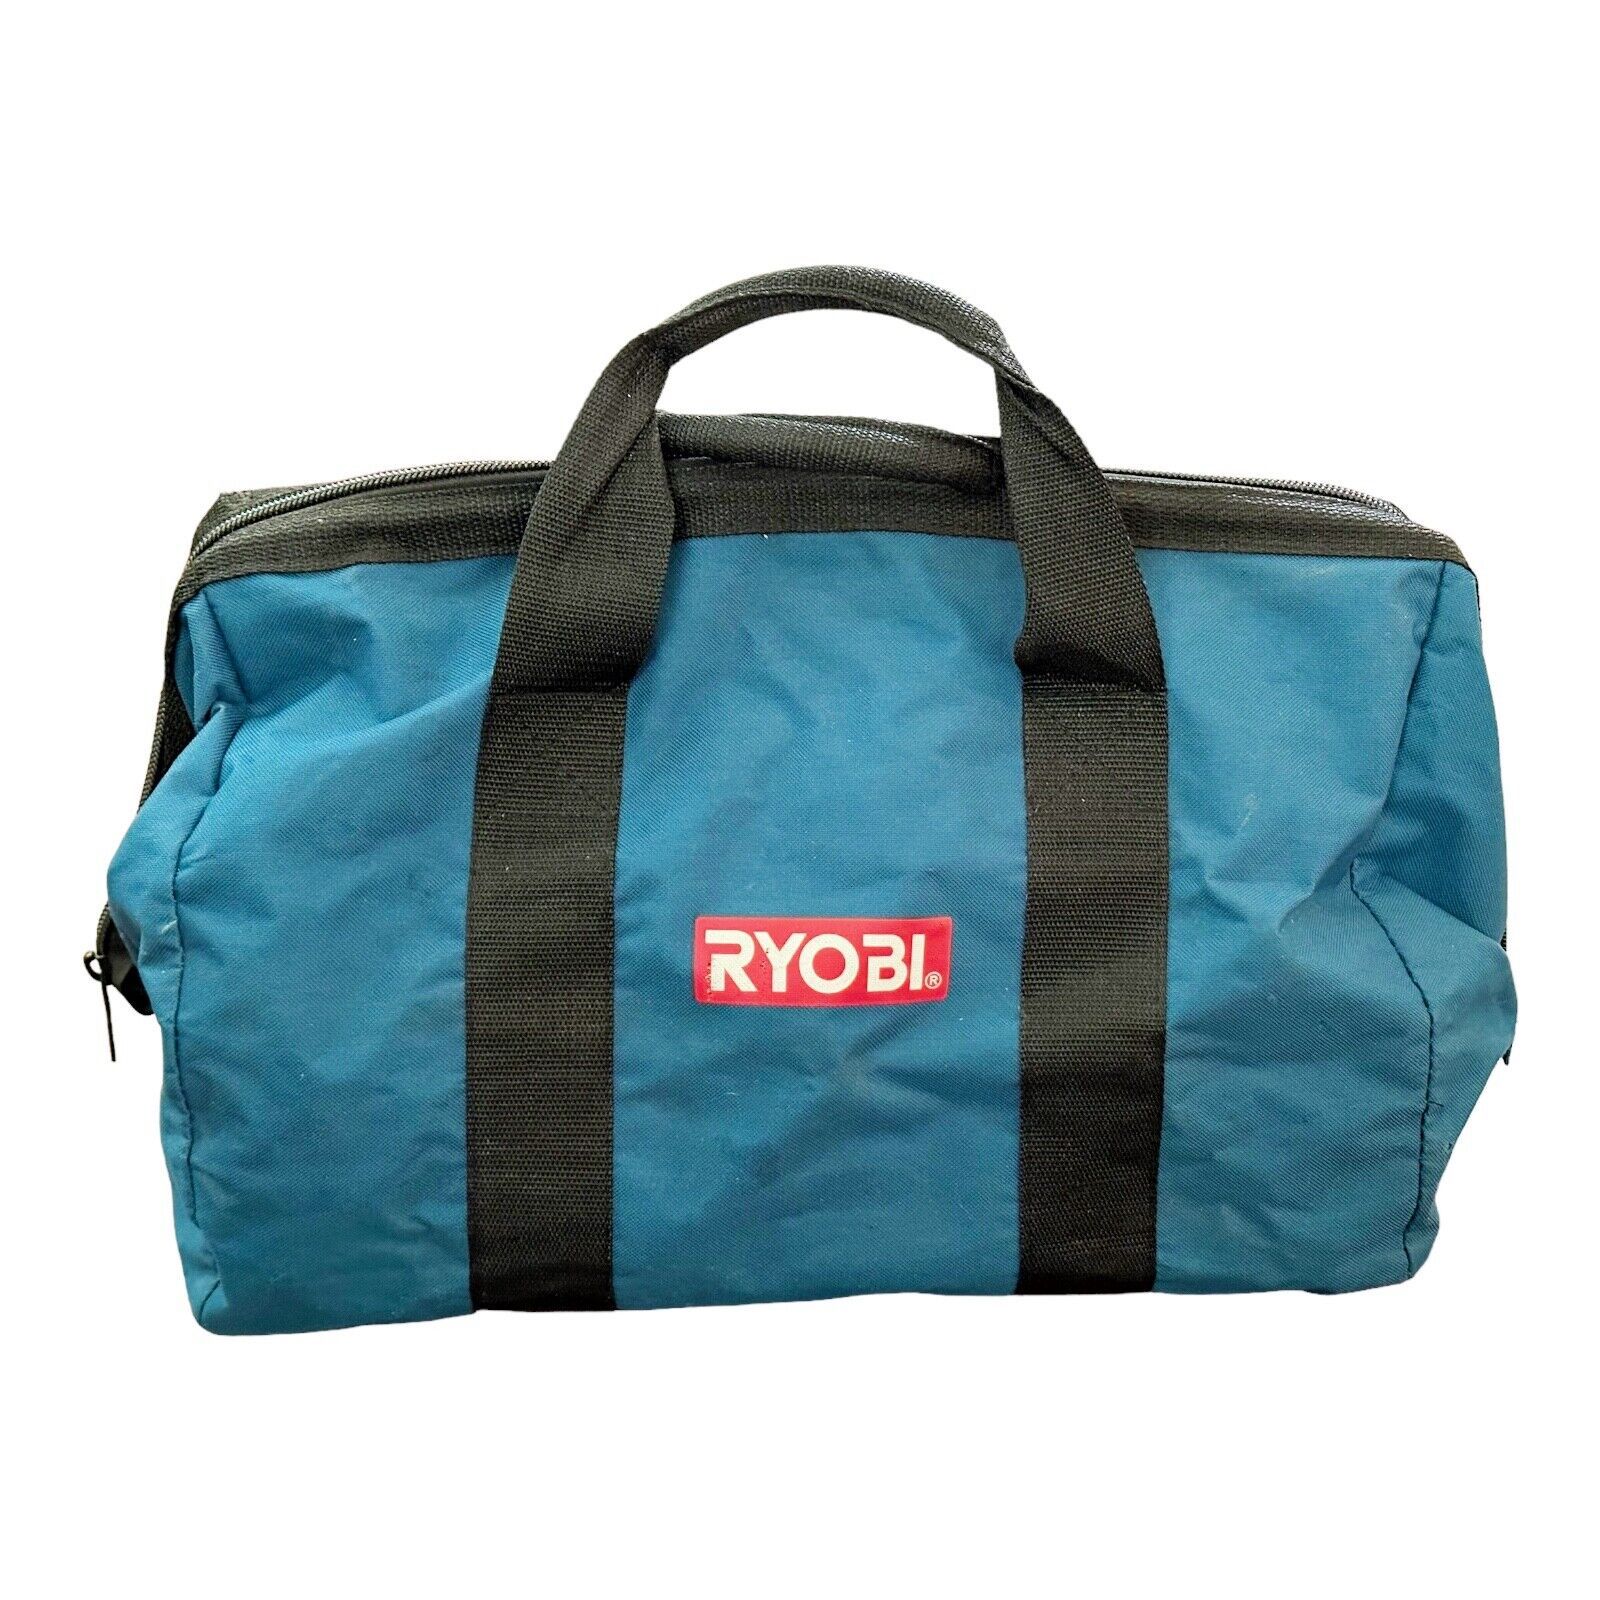 Ryobi Portable Wide-Mouth Collapsible Tool Bag Carry Case Power Tools Blue 18x12 - $19.59